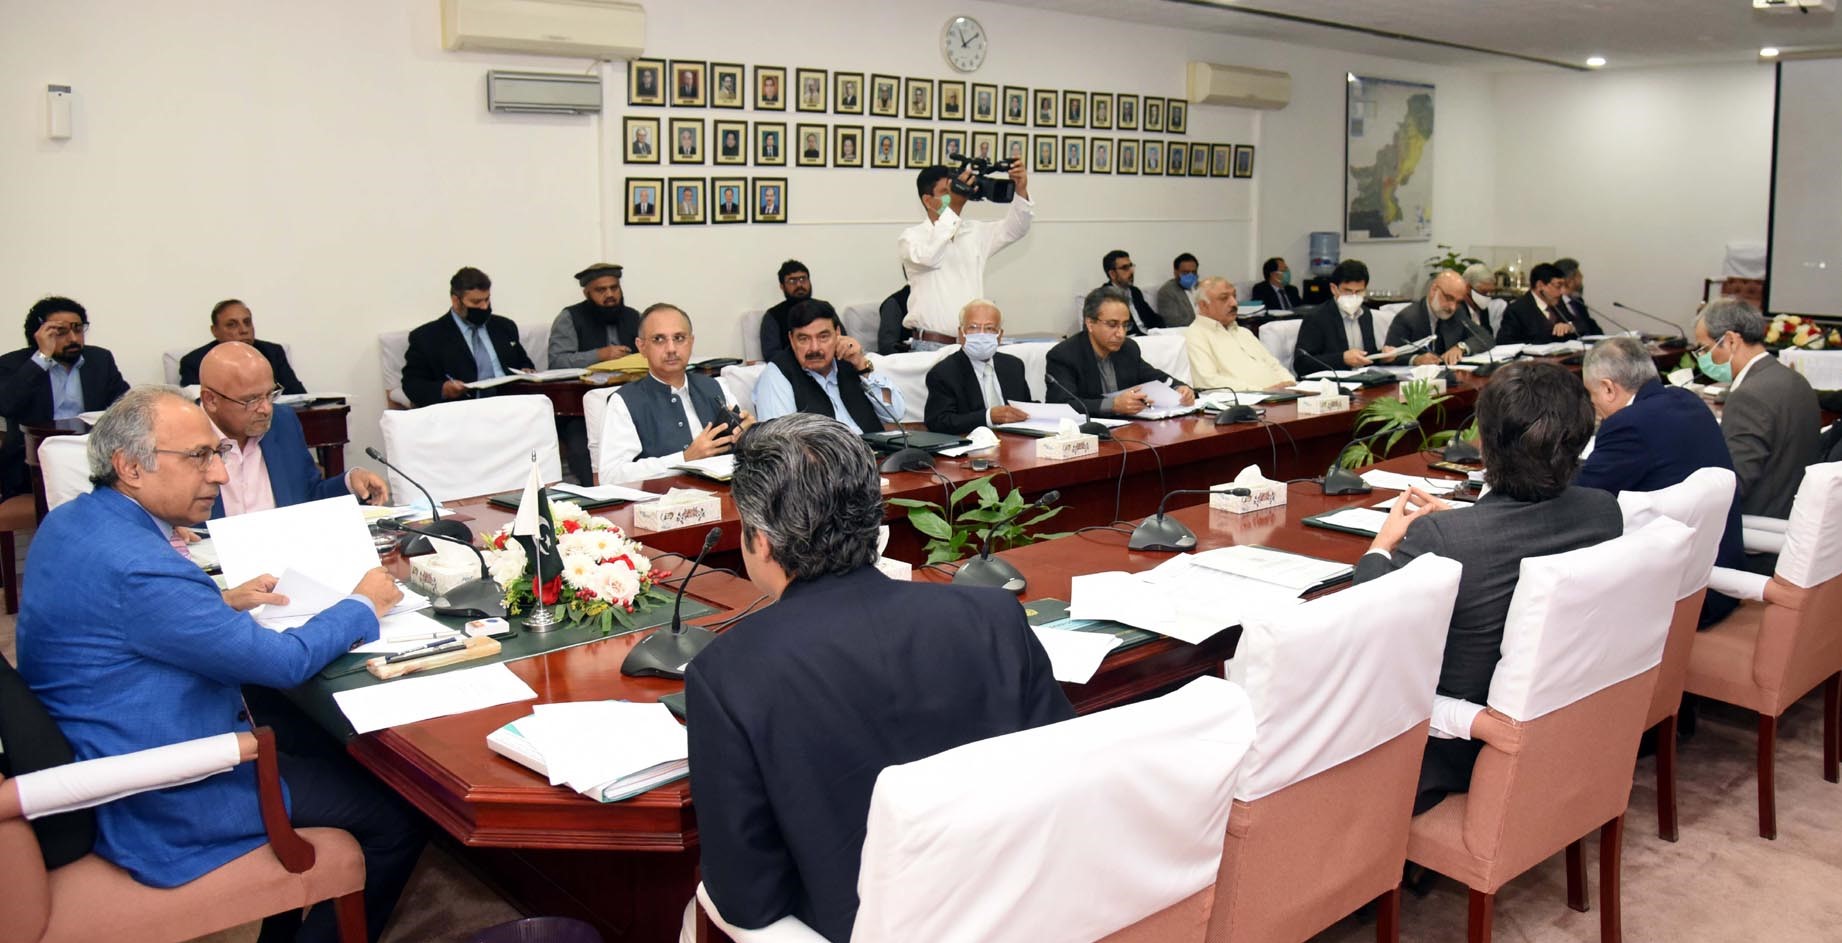 ADVISER TO THE PRIME MINISTER ON FINANCE AND REVENUE, DR. ABDUL HAFEEZ SHAIKH CHAIRING THE MEETING OF THE ECONOMIC COORDINATION COMMITTEE OF THE CABINET (ECC) IN ISLAMABAD ON APRIL 08, 2020.